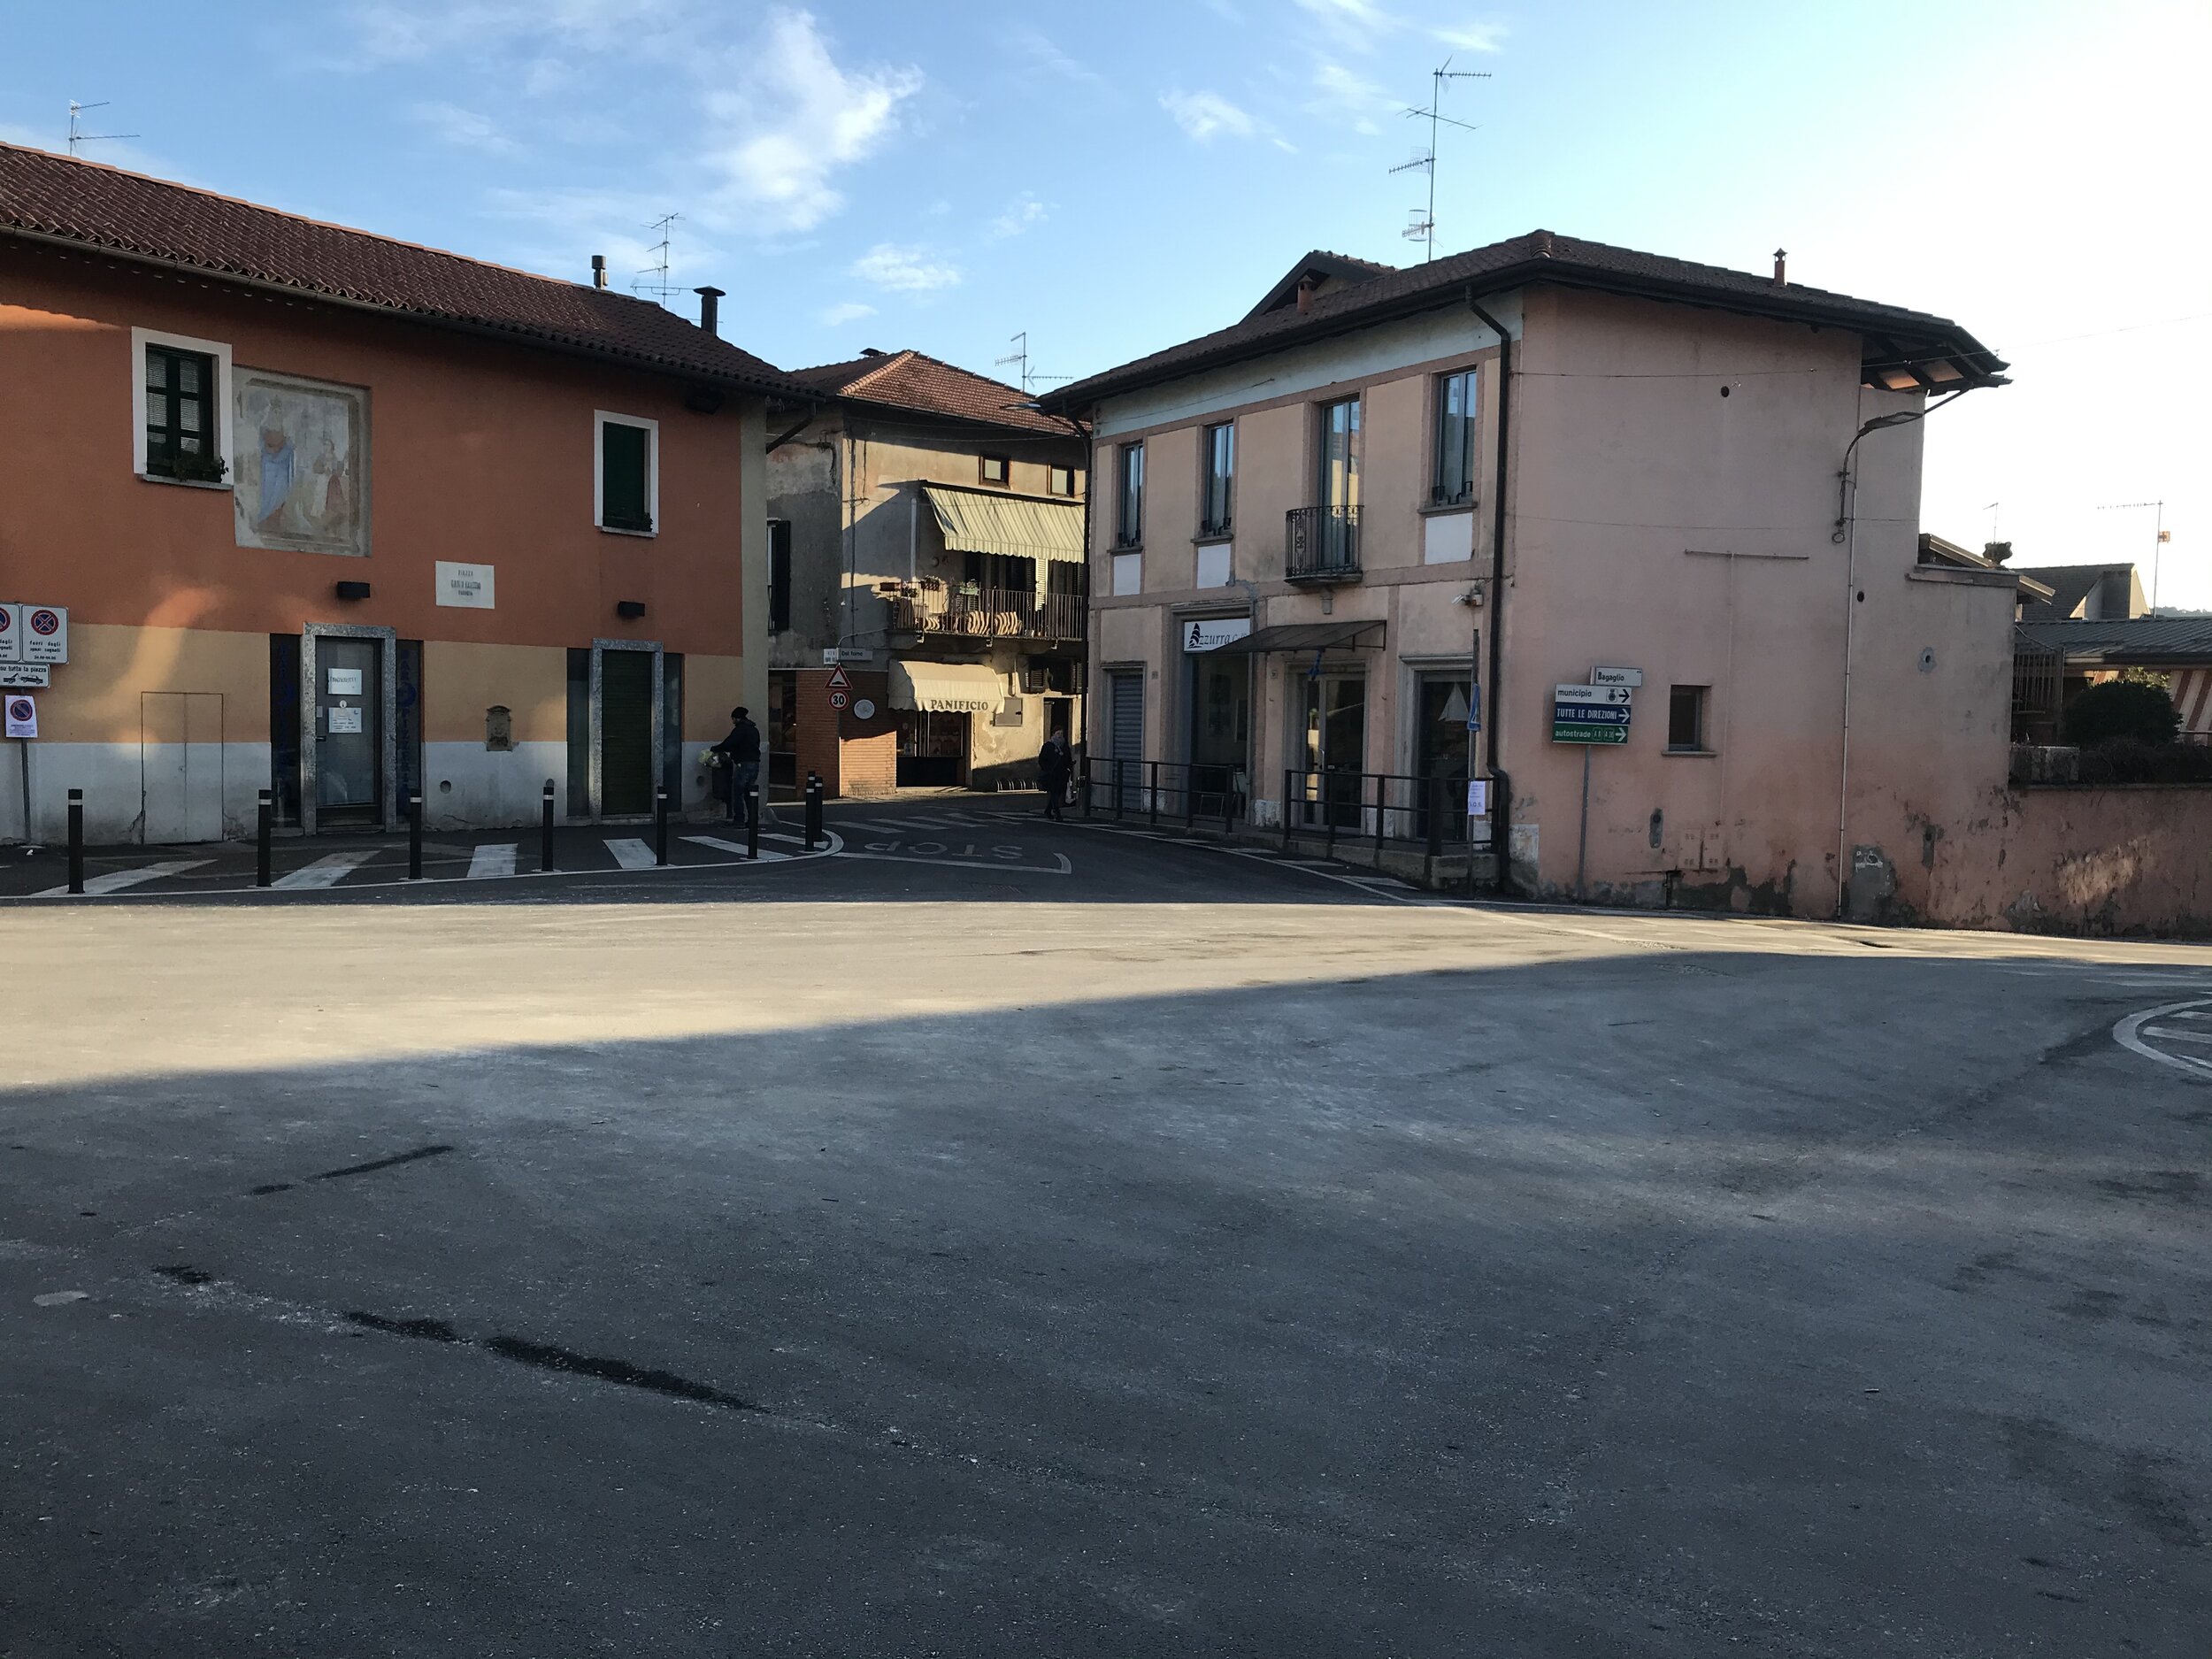 PICTURED: Piazza Balconi, Mercallo, my current residence.